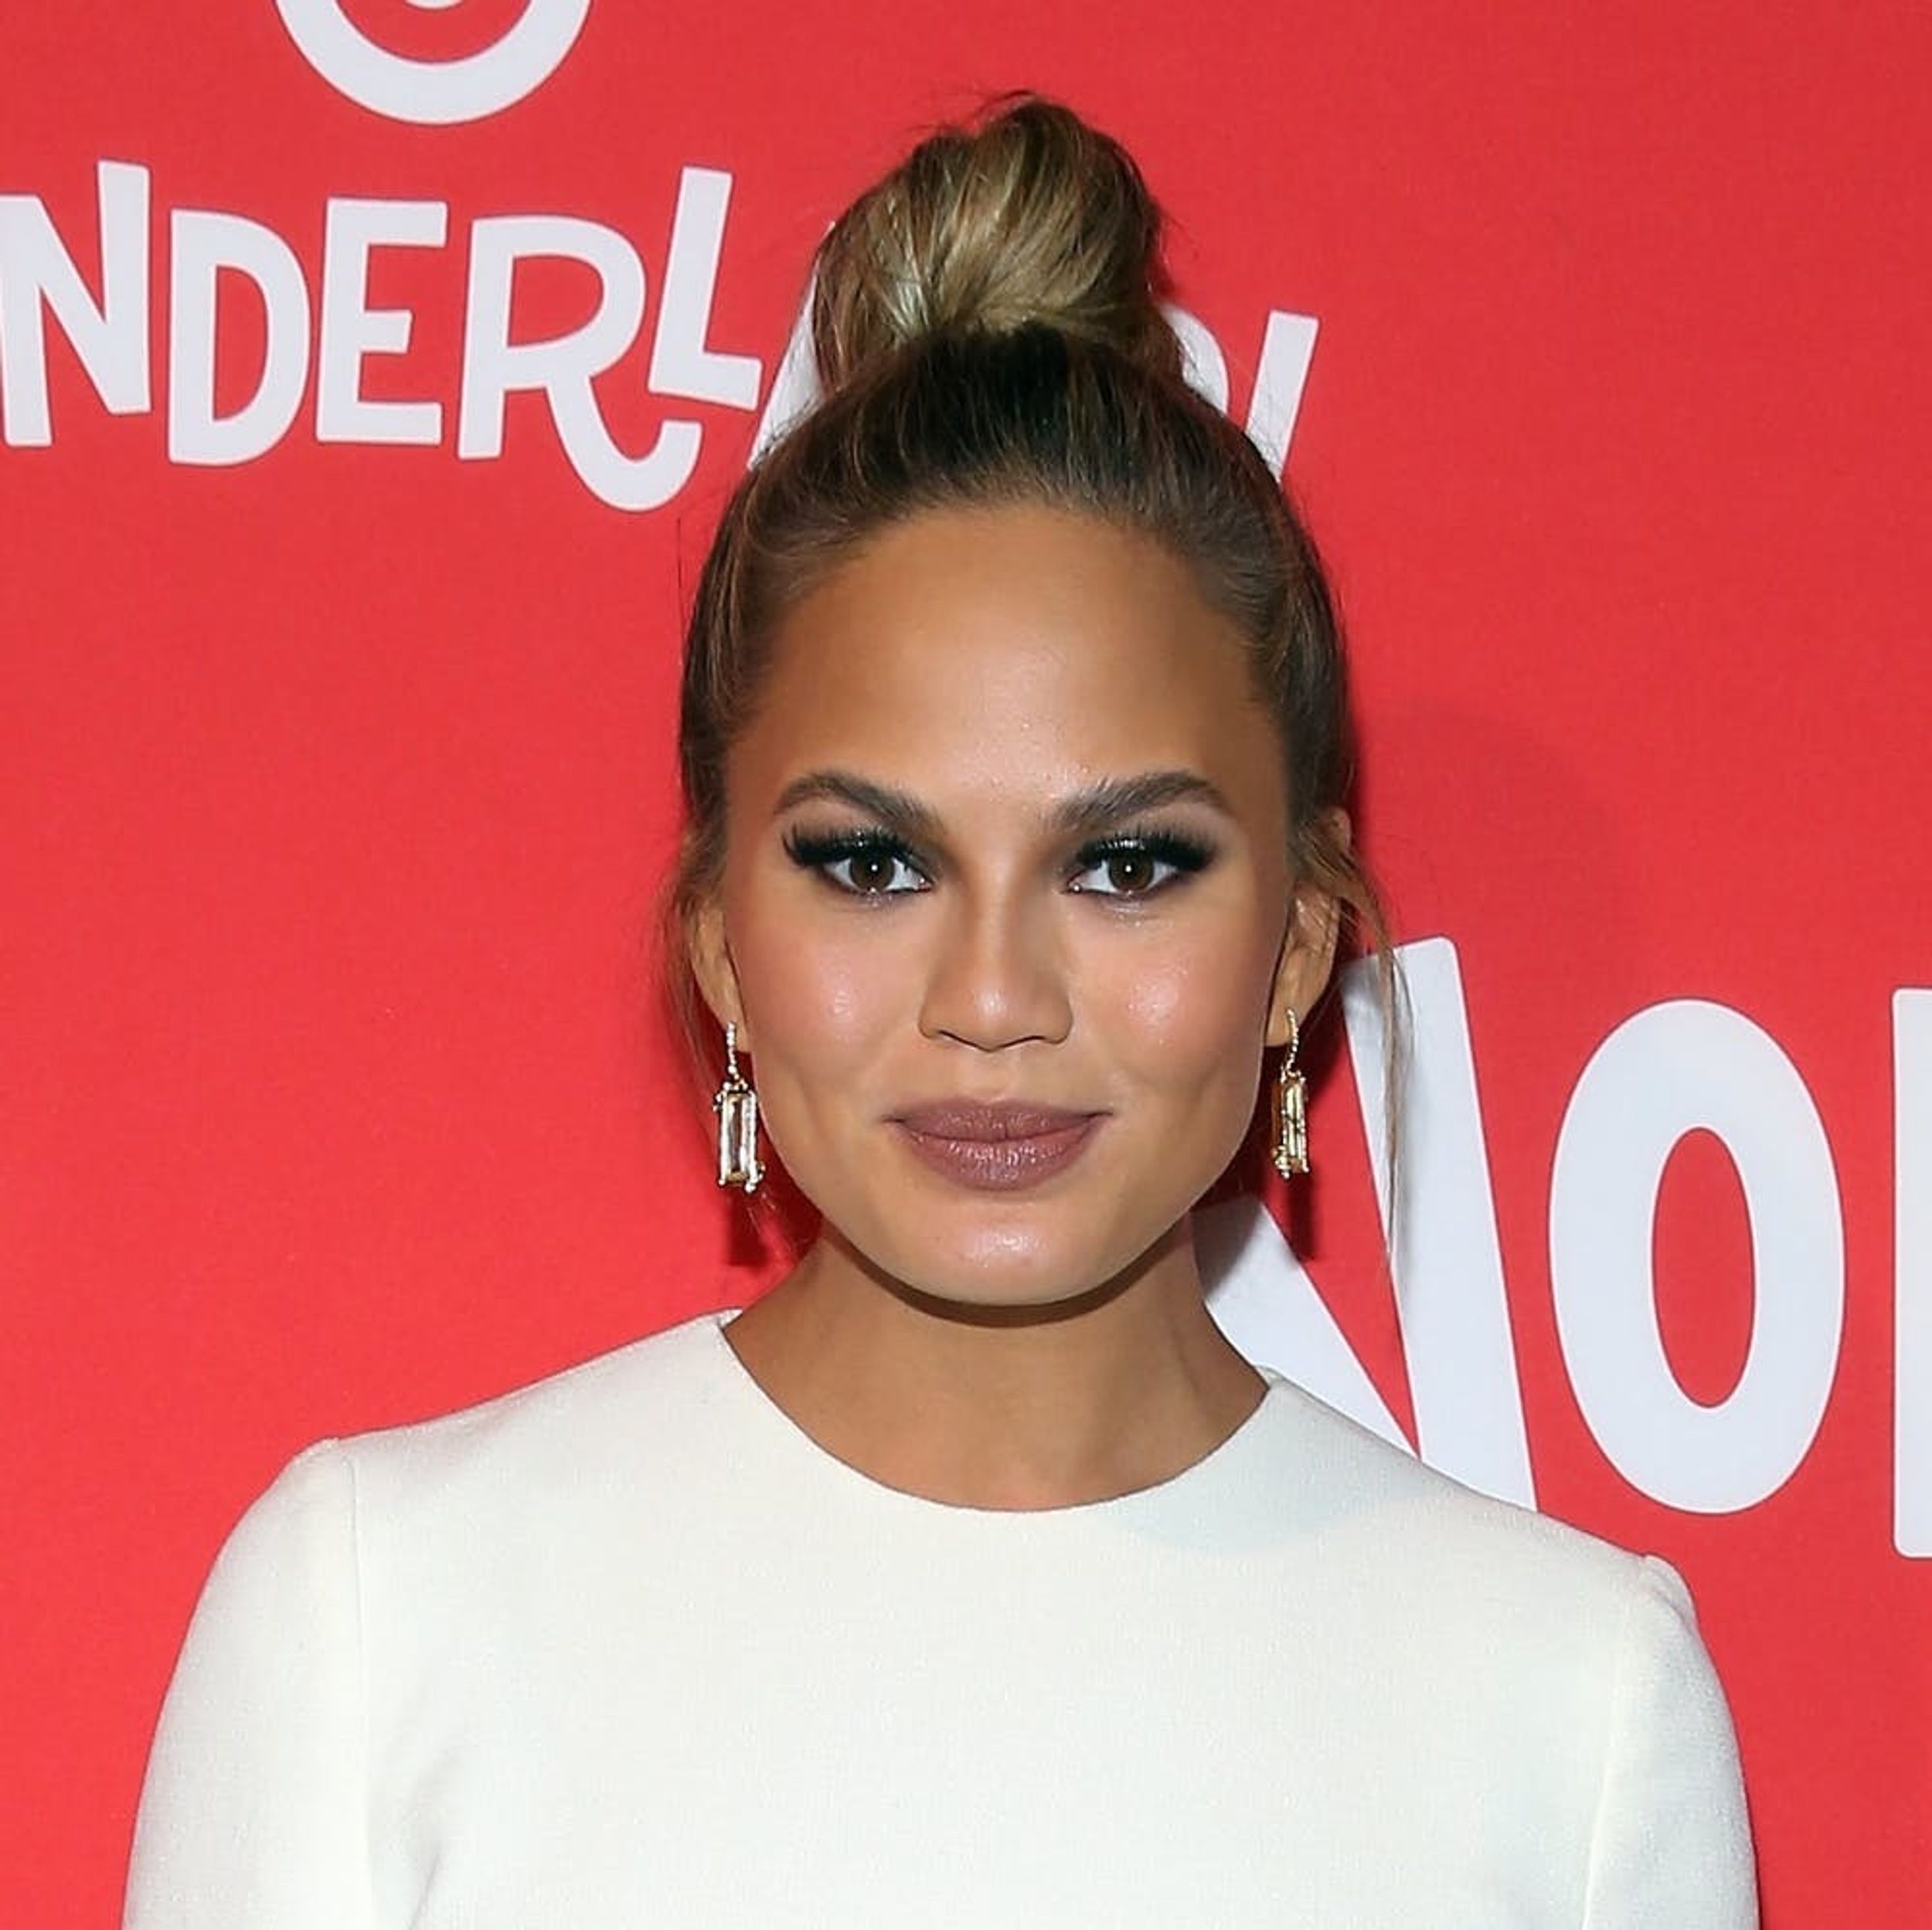 Chrissy Teigen’s Latest Baby Name Will Make You Laugh